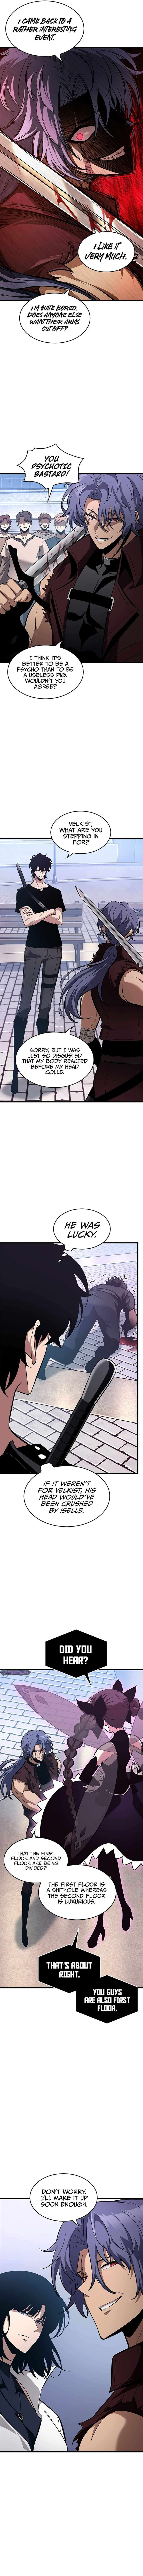 Pick Me Up Chapter 57 page 5